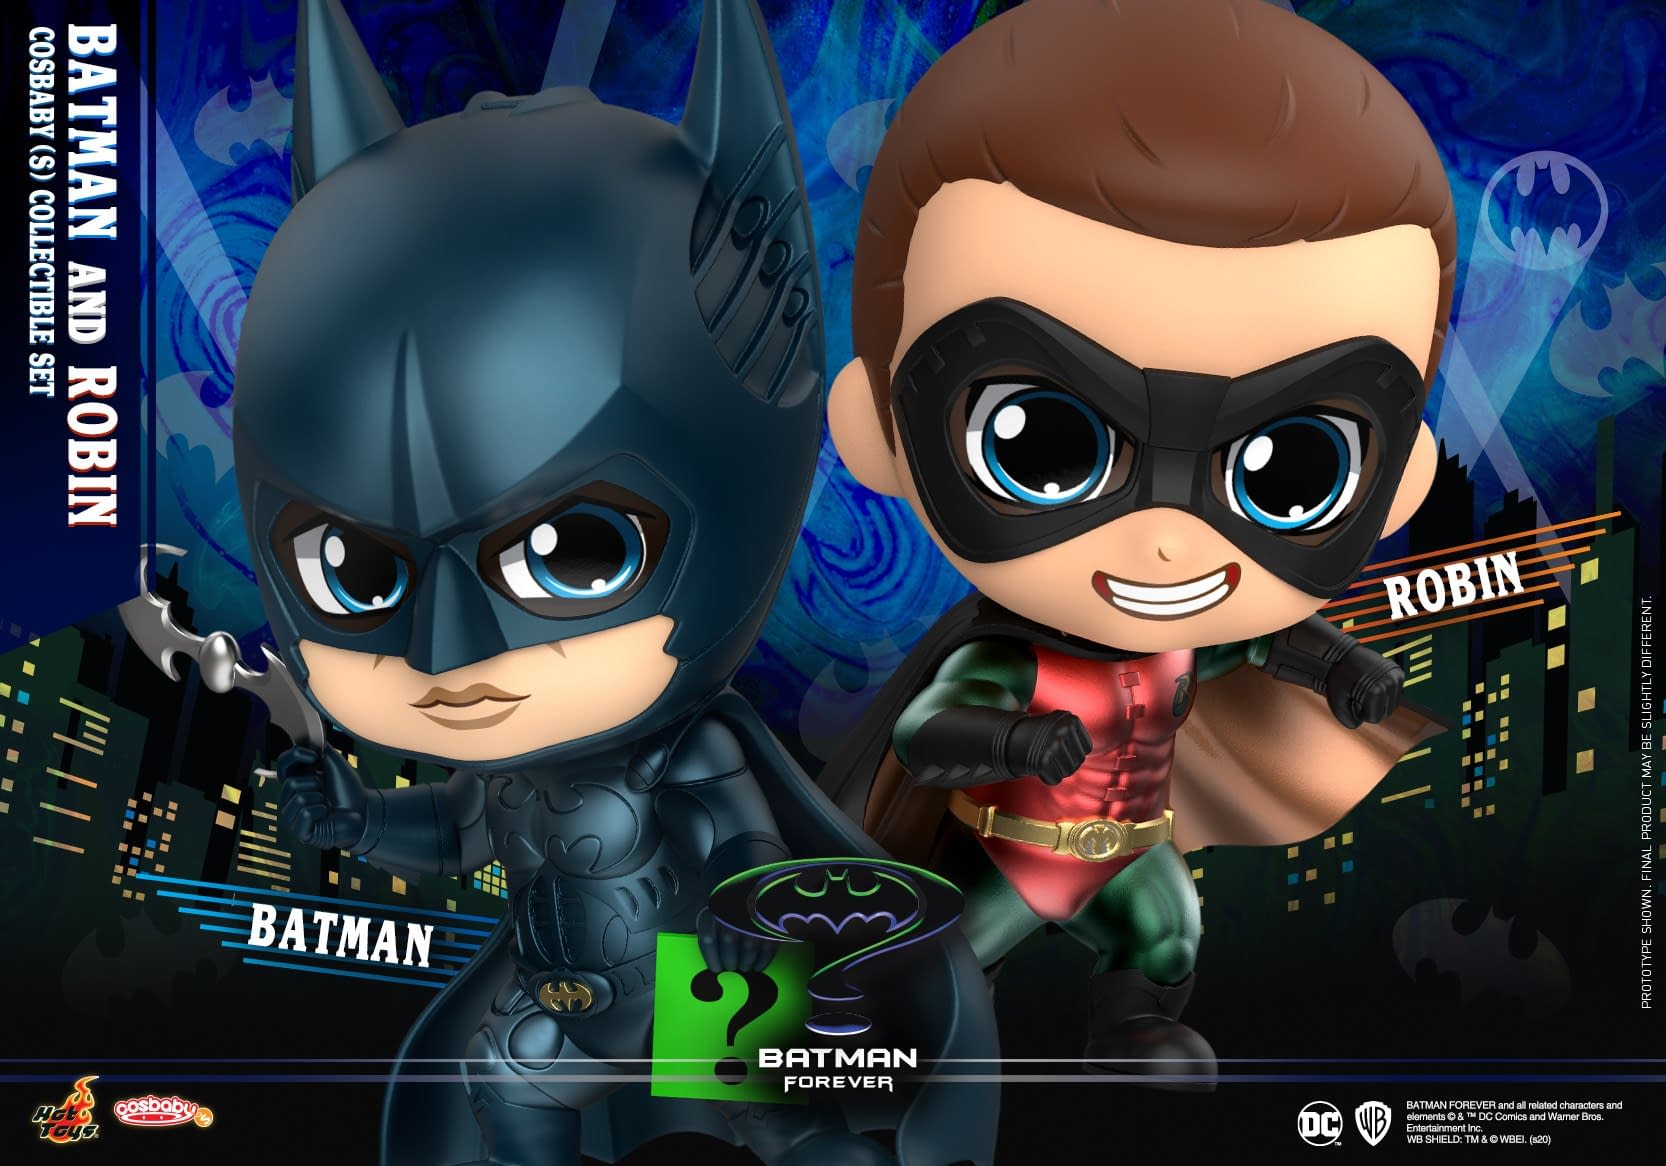 "Batman Forever" Cosbaby Figures Arrive with Hot Toys